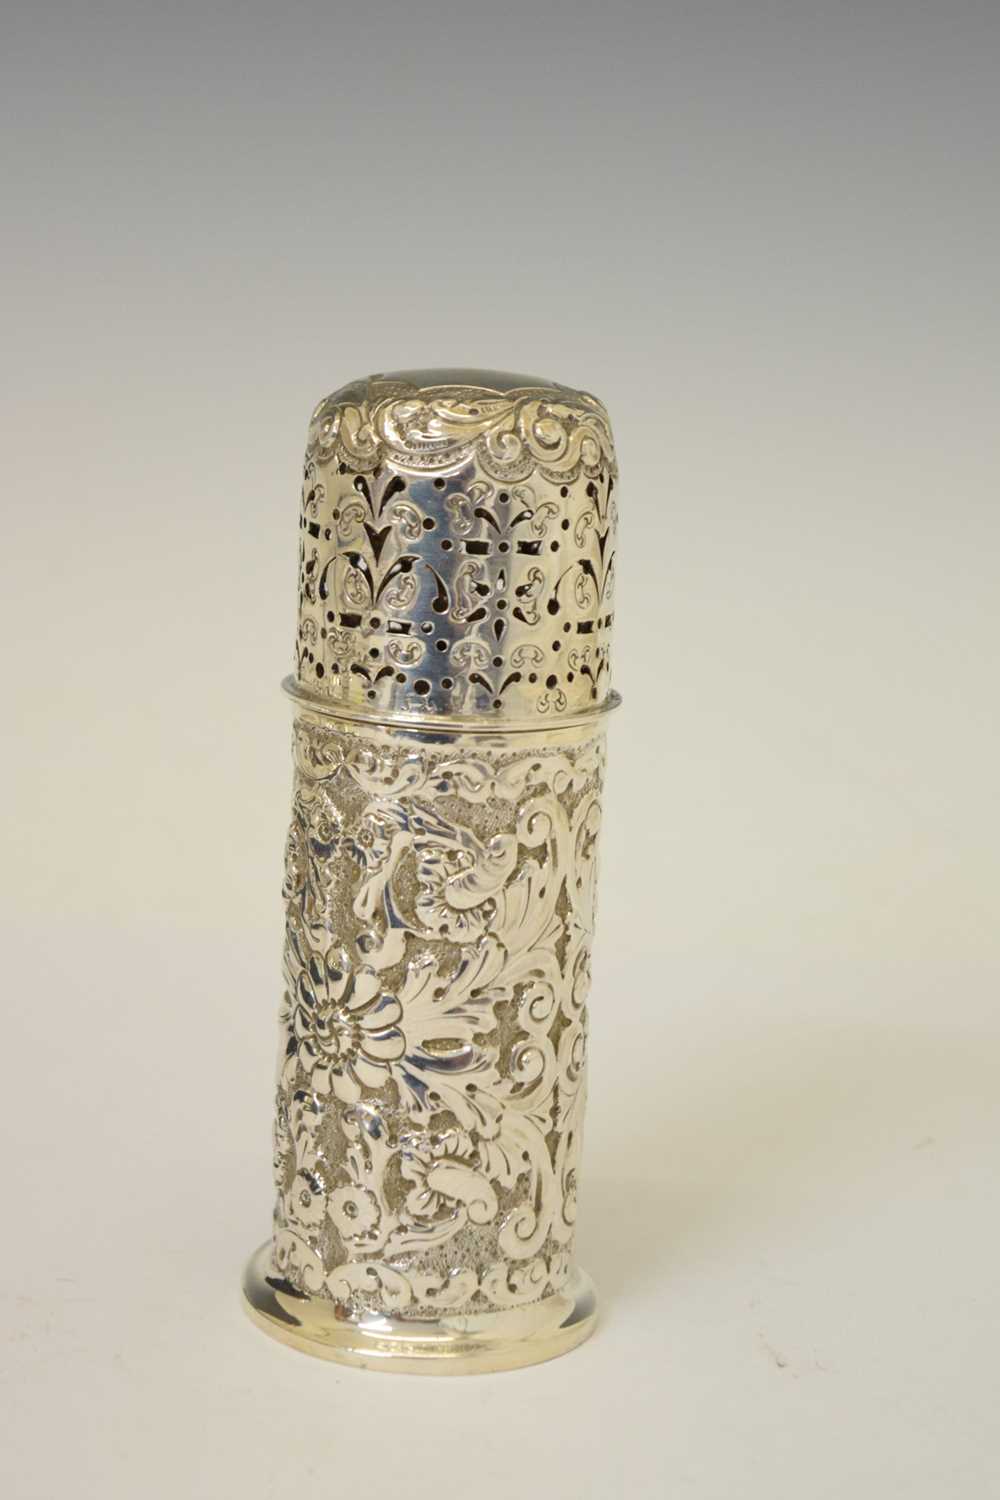 Victorian silver sugar caster with repousse decoration, Christening sets, etc - Image 2 of 6